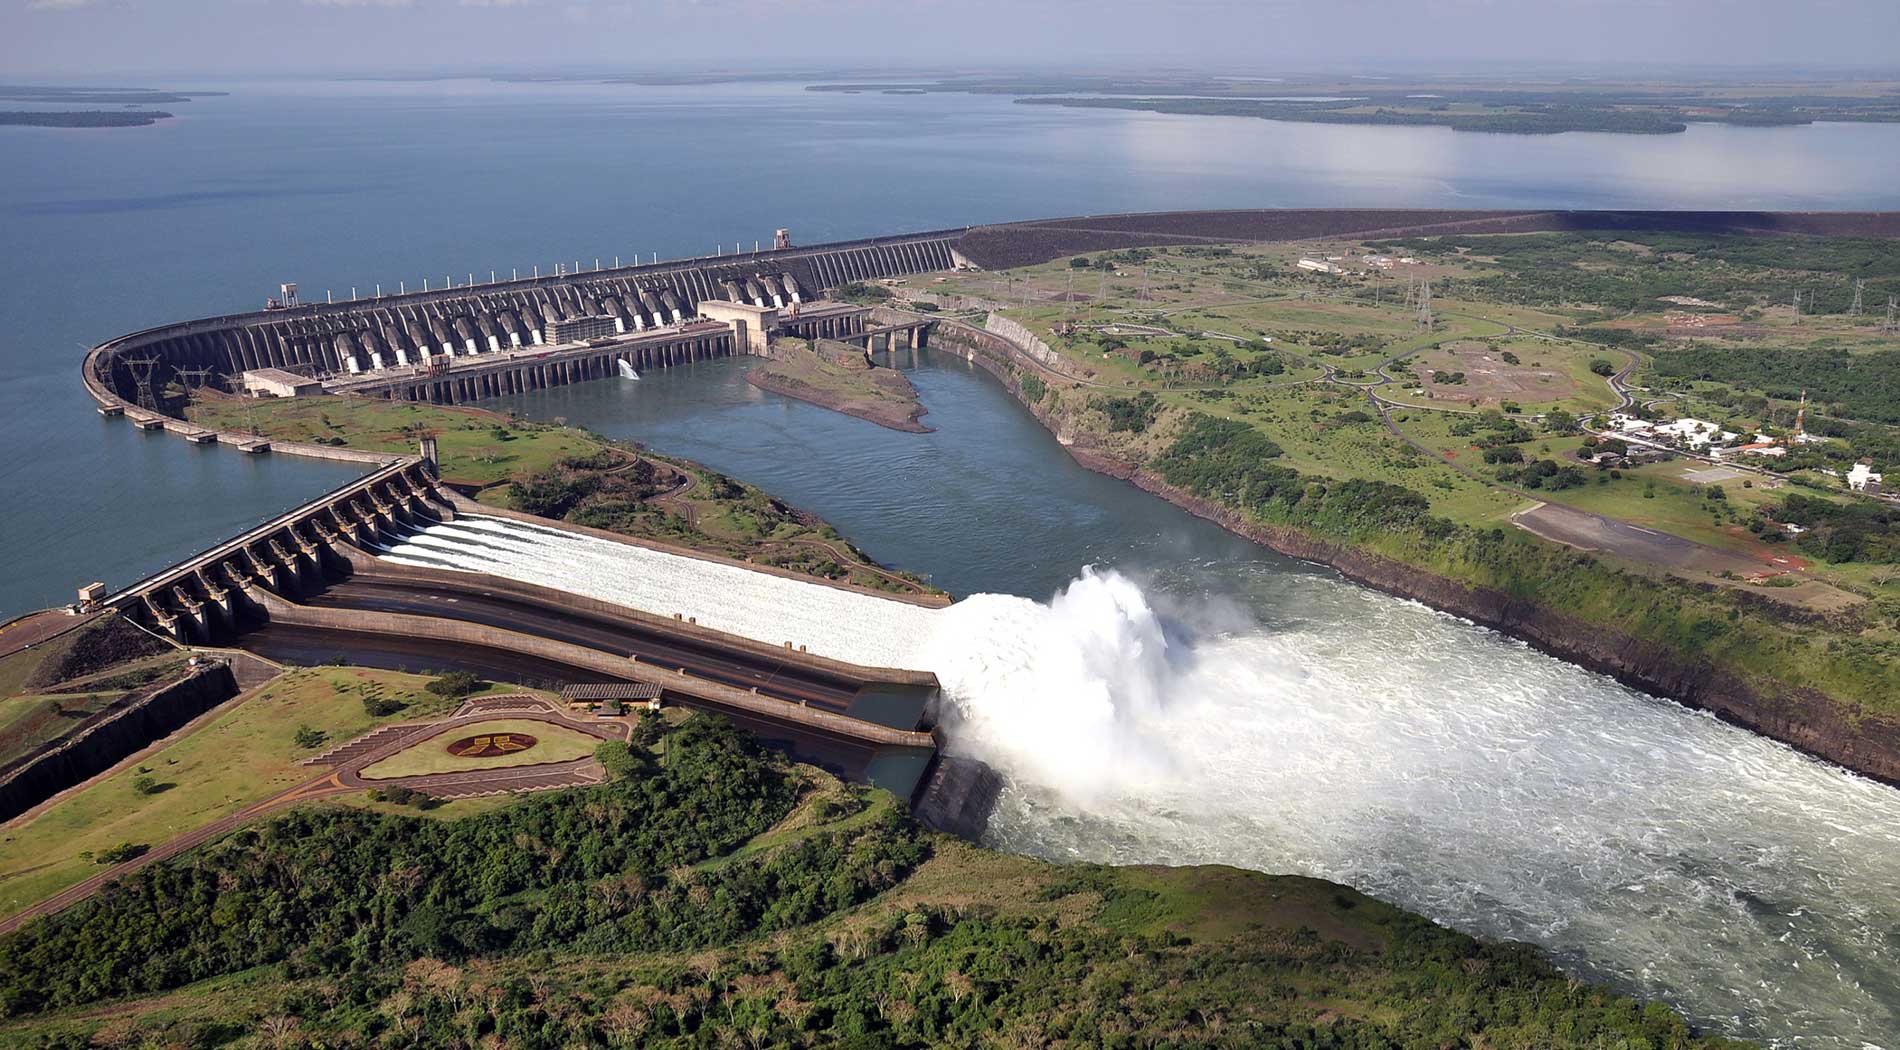 The Itaipu Hydroelectric Dam on the Parana River